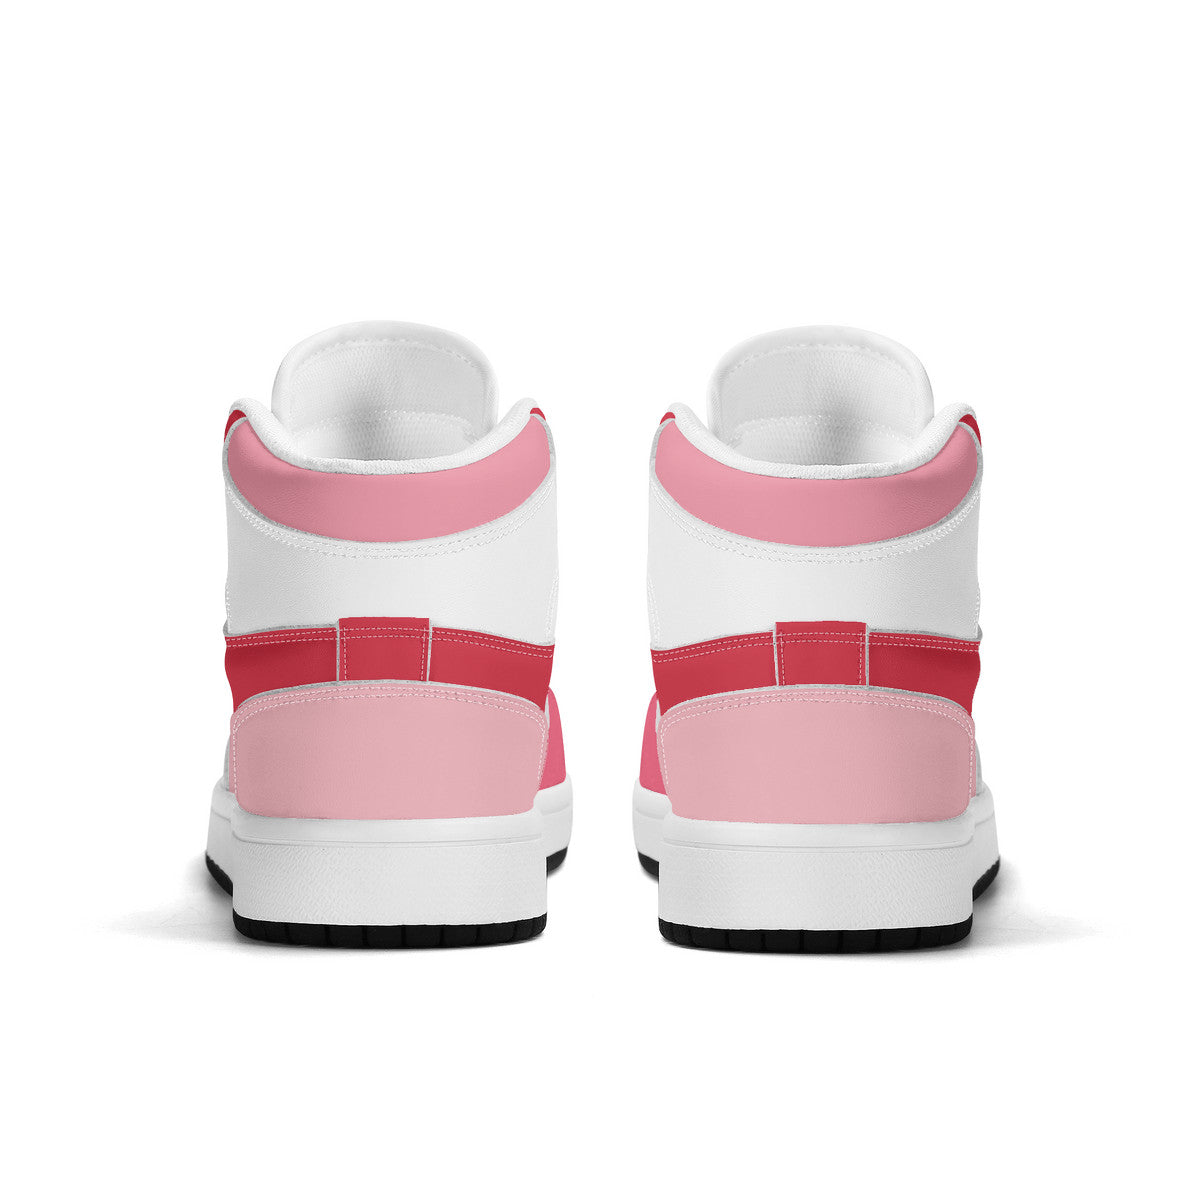 Customize Your Own Kids High-Top PU Leather Sneakers-Pinks